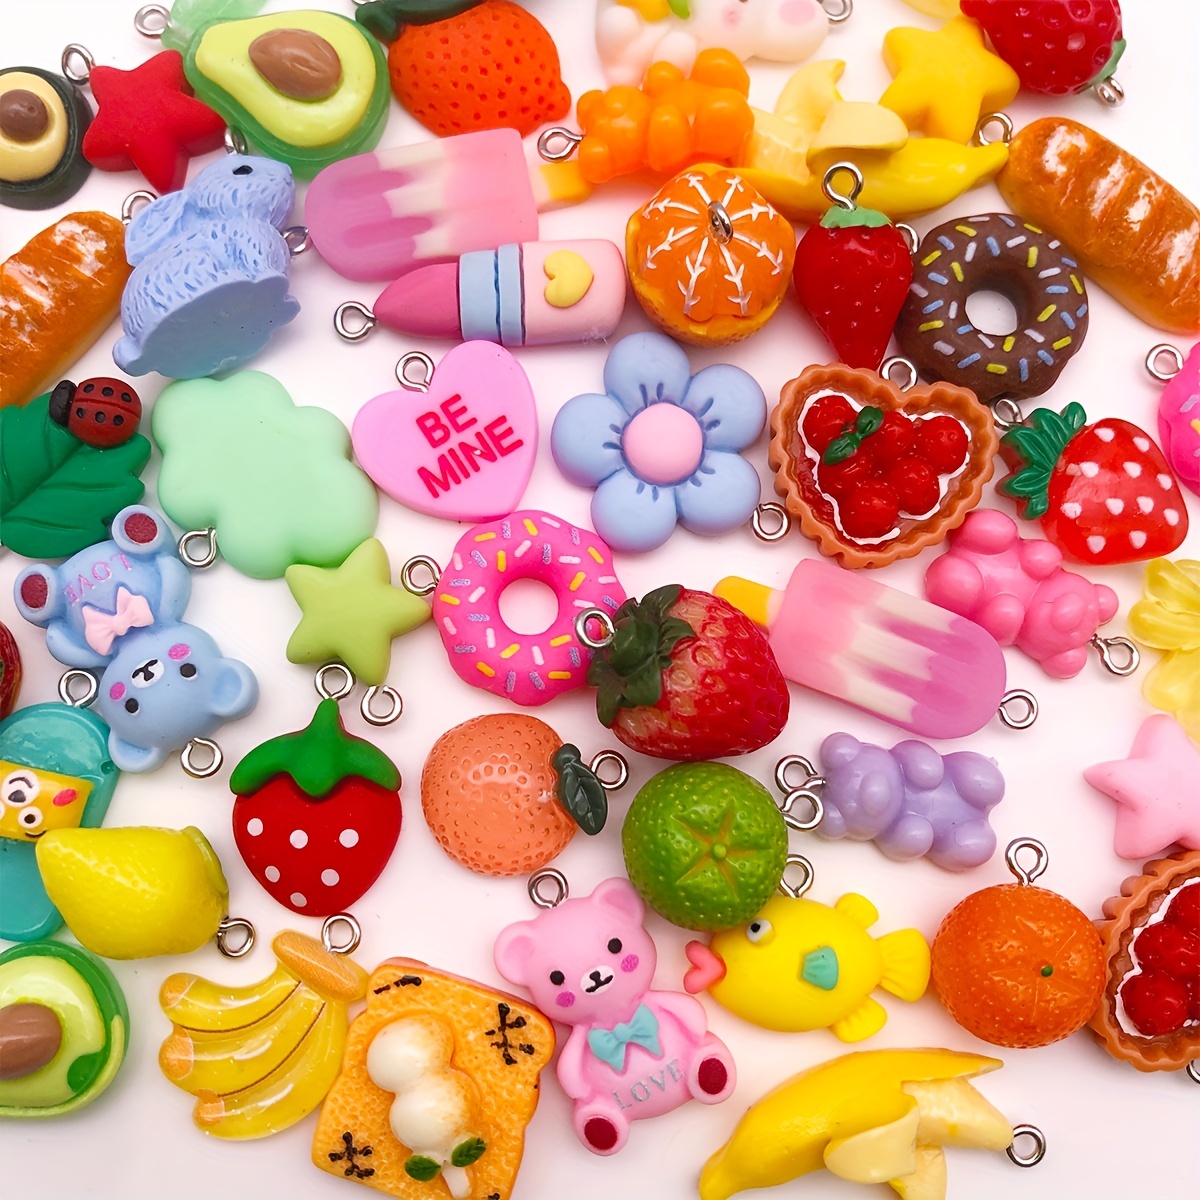 30pcs Mixed Cartoon Animals Resin Charms for Jewelry Making Earrings  Necklace Pendant Cabochon Randomly (Not Only Photo Show)